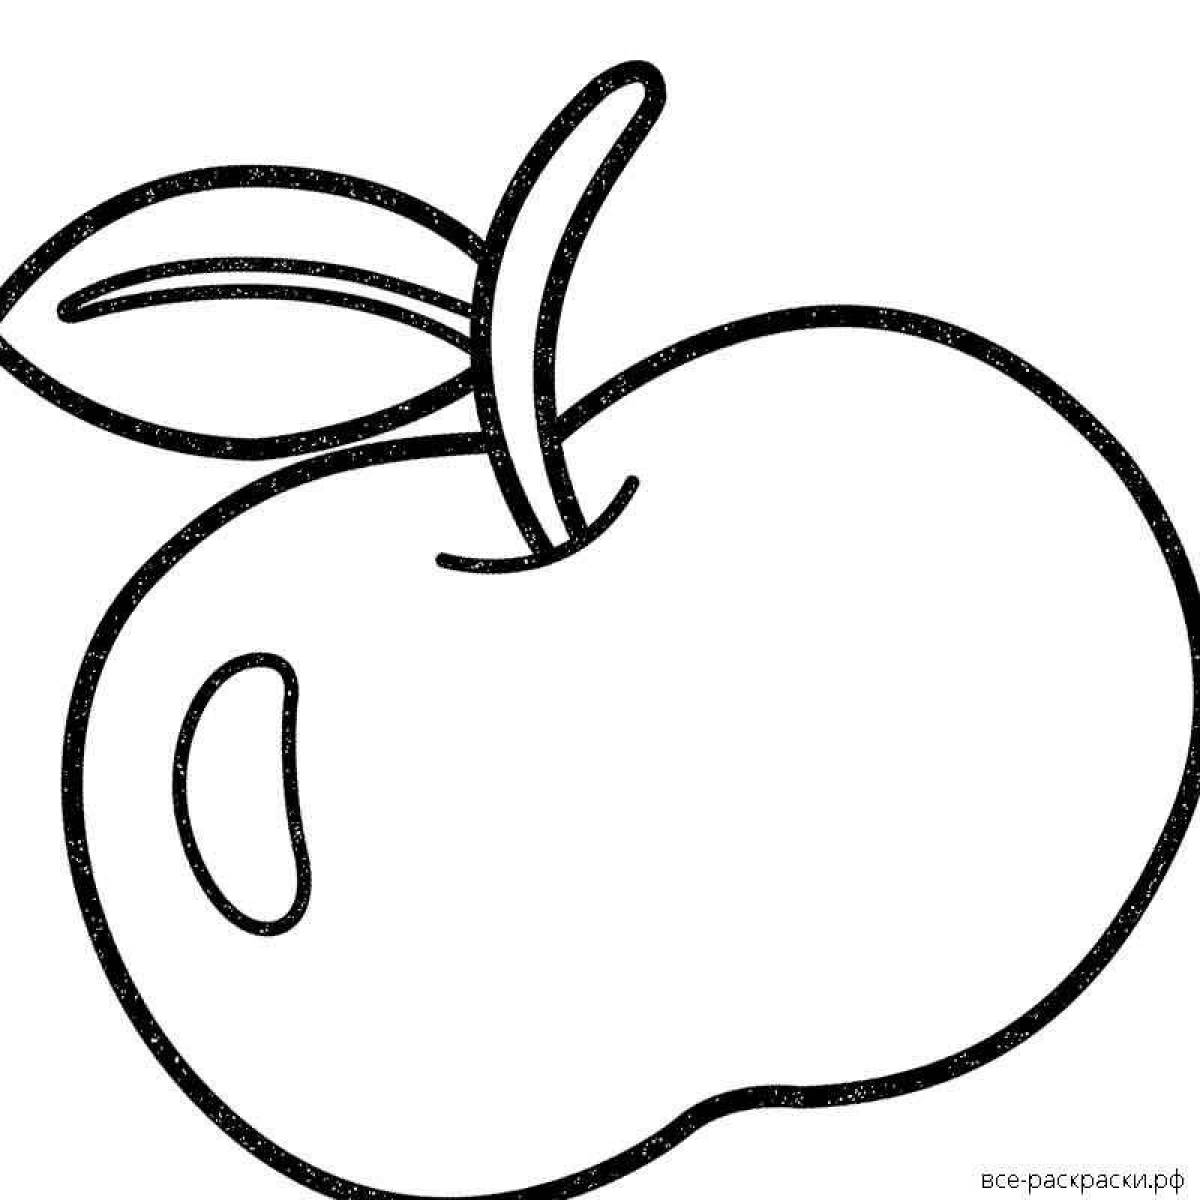 Fun coloring apple for children 3-4 years old